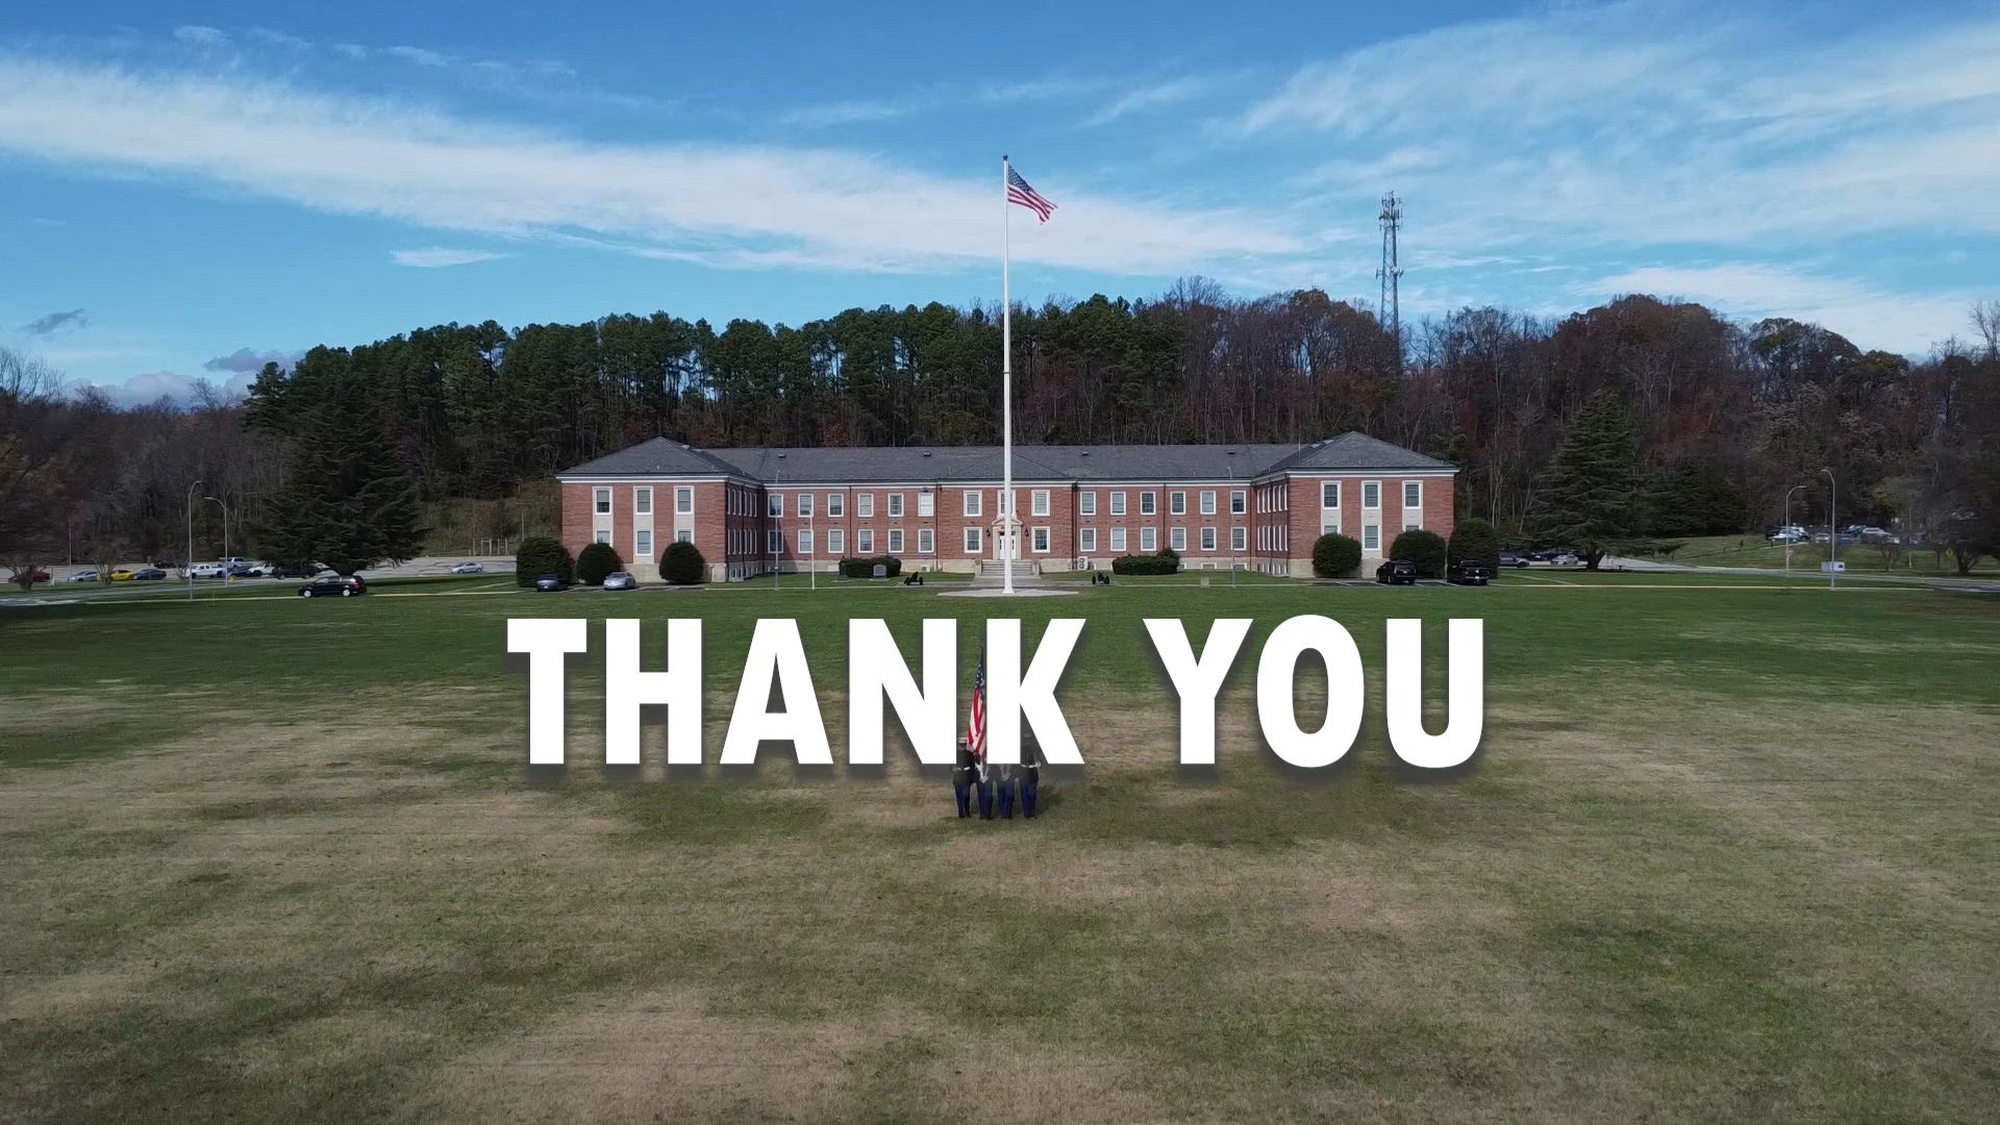 A video message that thanks the thousands of military service members and civilians who work behind the scenes to make Marine Corps Base Quantico functional, operational and successful. MCINCR-MCBQ supports over 25,000 servicemembers and their families, civilians, students, and contractors, and it is the home to 27 tenant commands, all responsible for various mission sets staged across its 59,050 acres.